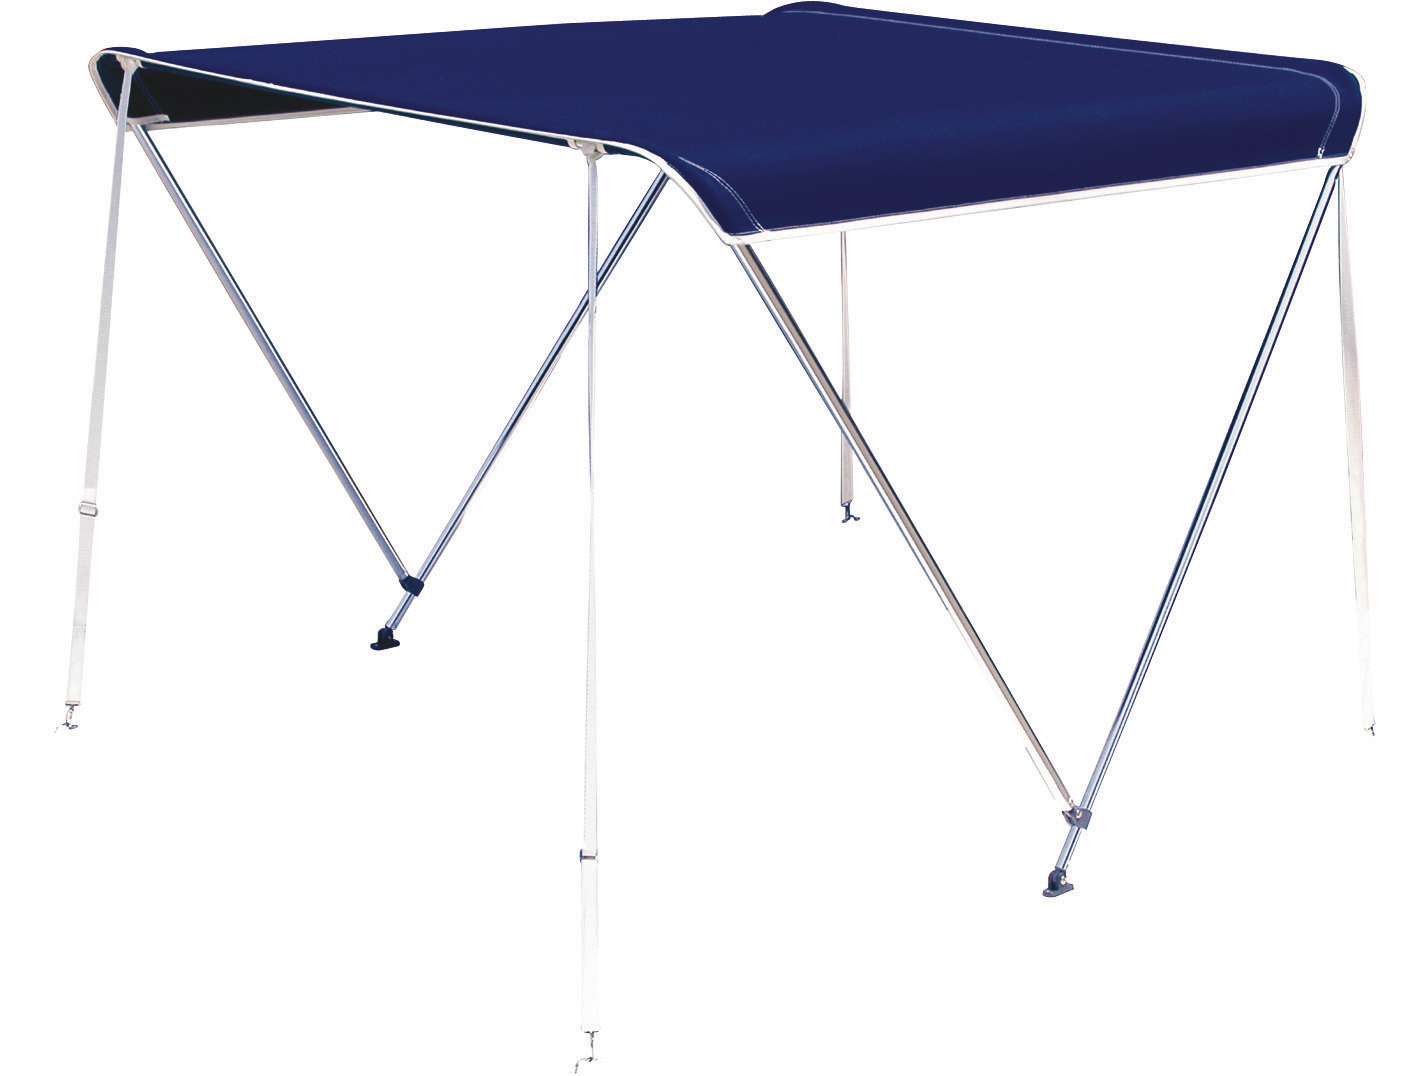 2 Bow Bimini Kit Complete With All Tubes And Fastenings Blue 1.3-1.5m